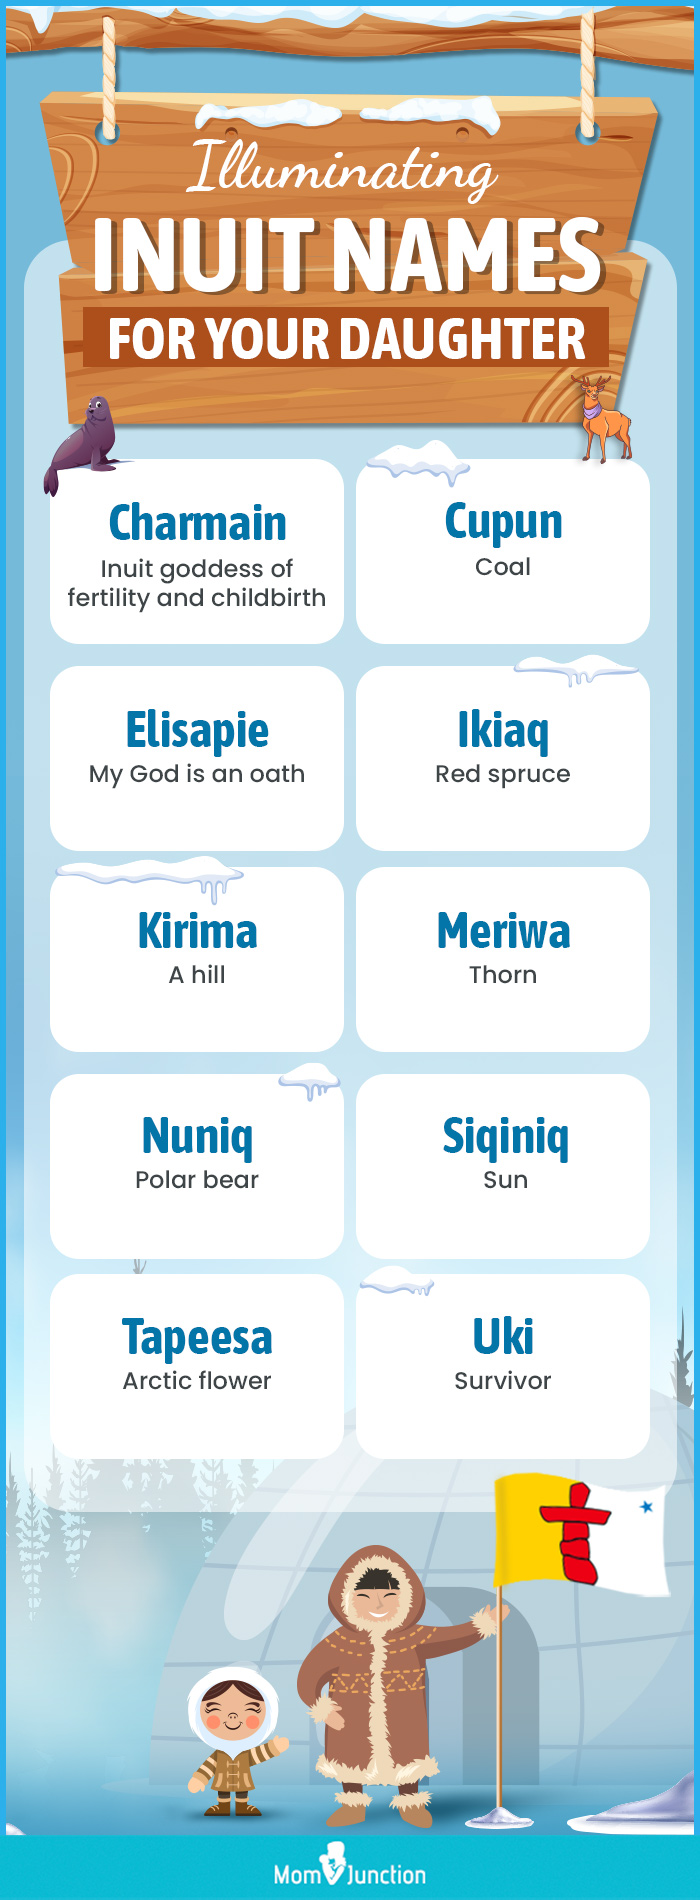 illuminating inuit names for your daughter(infographic)